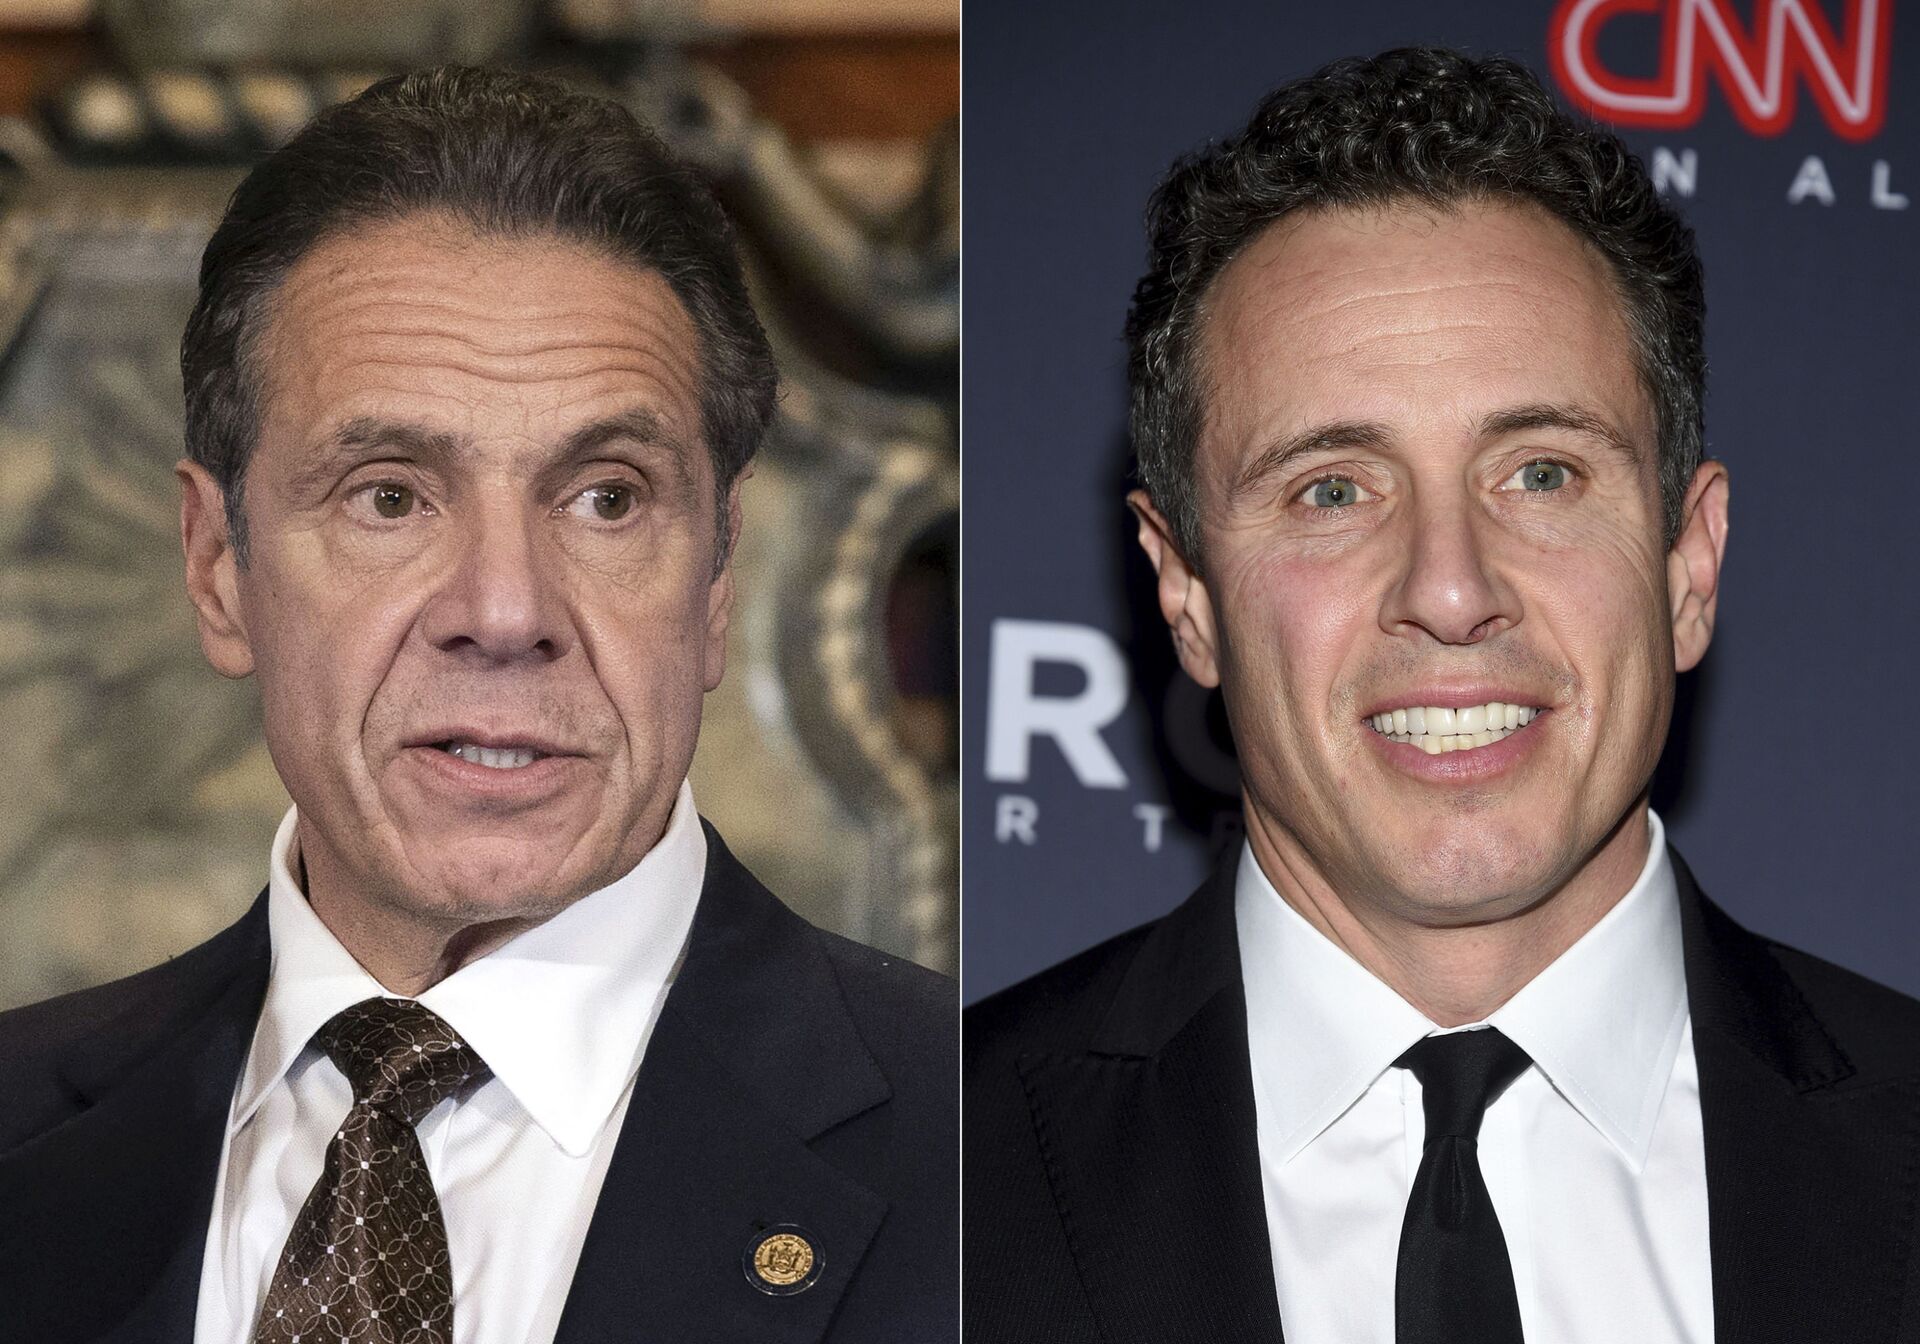 New York Gov. Andrew M. Cuomo appears during a news conference about the COVID-19at the State Capitol in Albany, N.Y., on Dec. 3, 2020, left, and CNN anchor Chris Cuomo attends the 12th annual CNN Heroes: An All-Star Tribute at the American Museum of Natural History in New York on Dec. 9, 2018. CNN said Thursday, May 20, 2021 it was “inappropriate” for anchor Chris Cuomo to have been involved in phone calls with the staff of his brother, New York Gov. Andrew Cuomo, where strategies on how the governor should respond to sexual harassment allegations were allegedly discussed. - Sputnik International, 1920, 07.09.2021